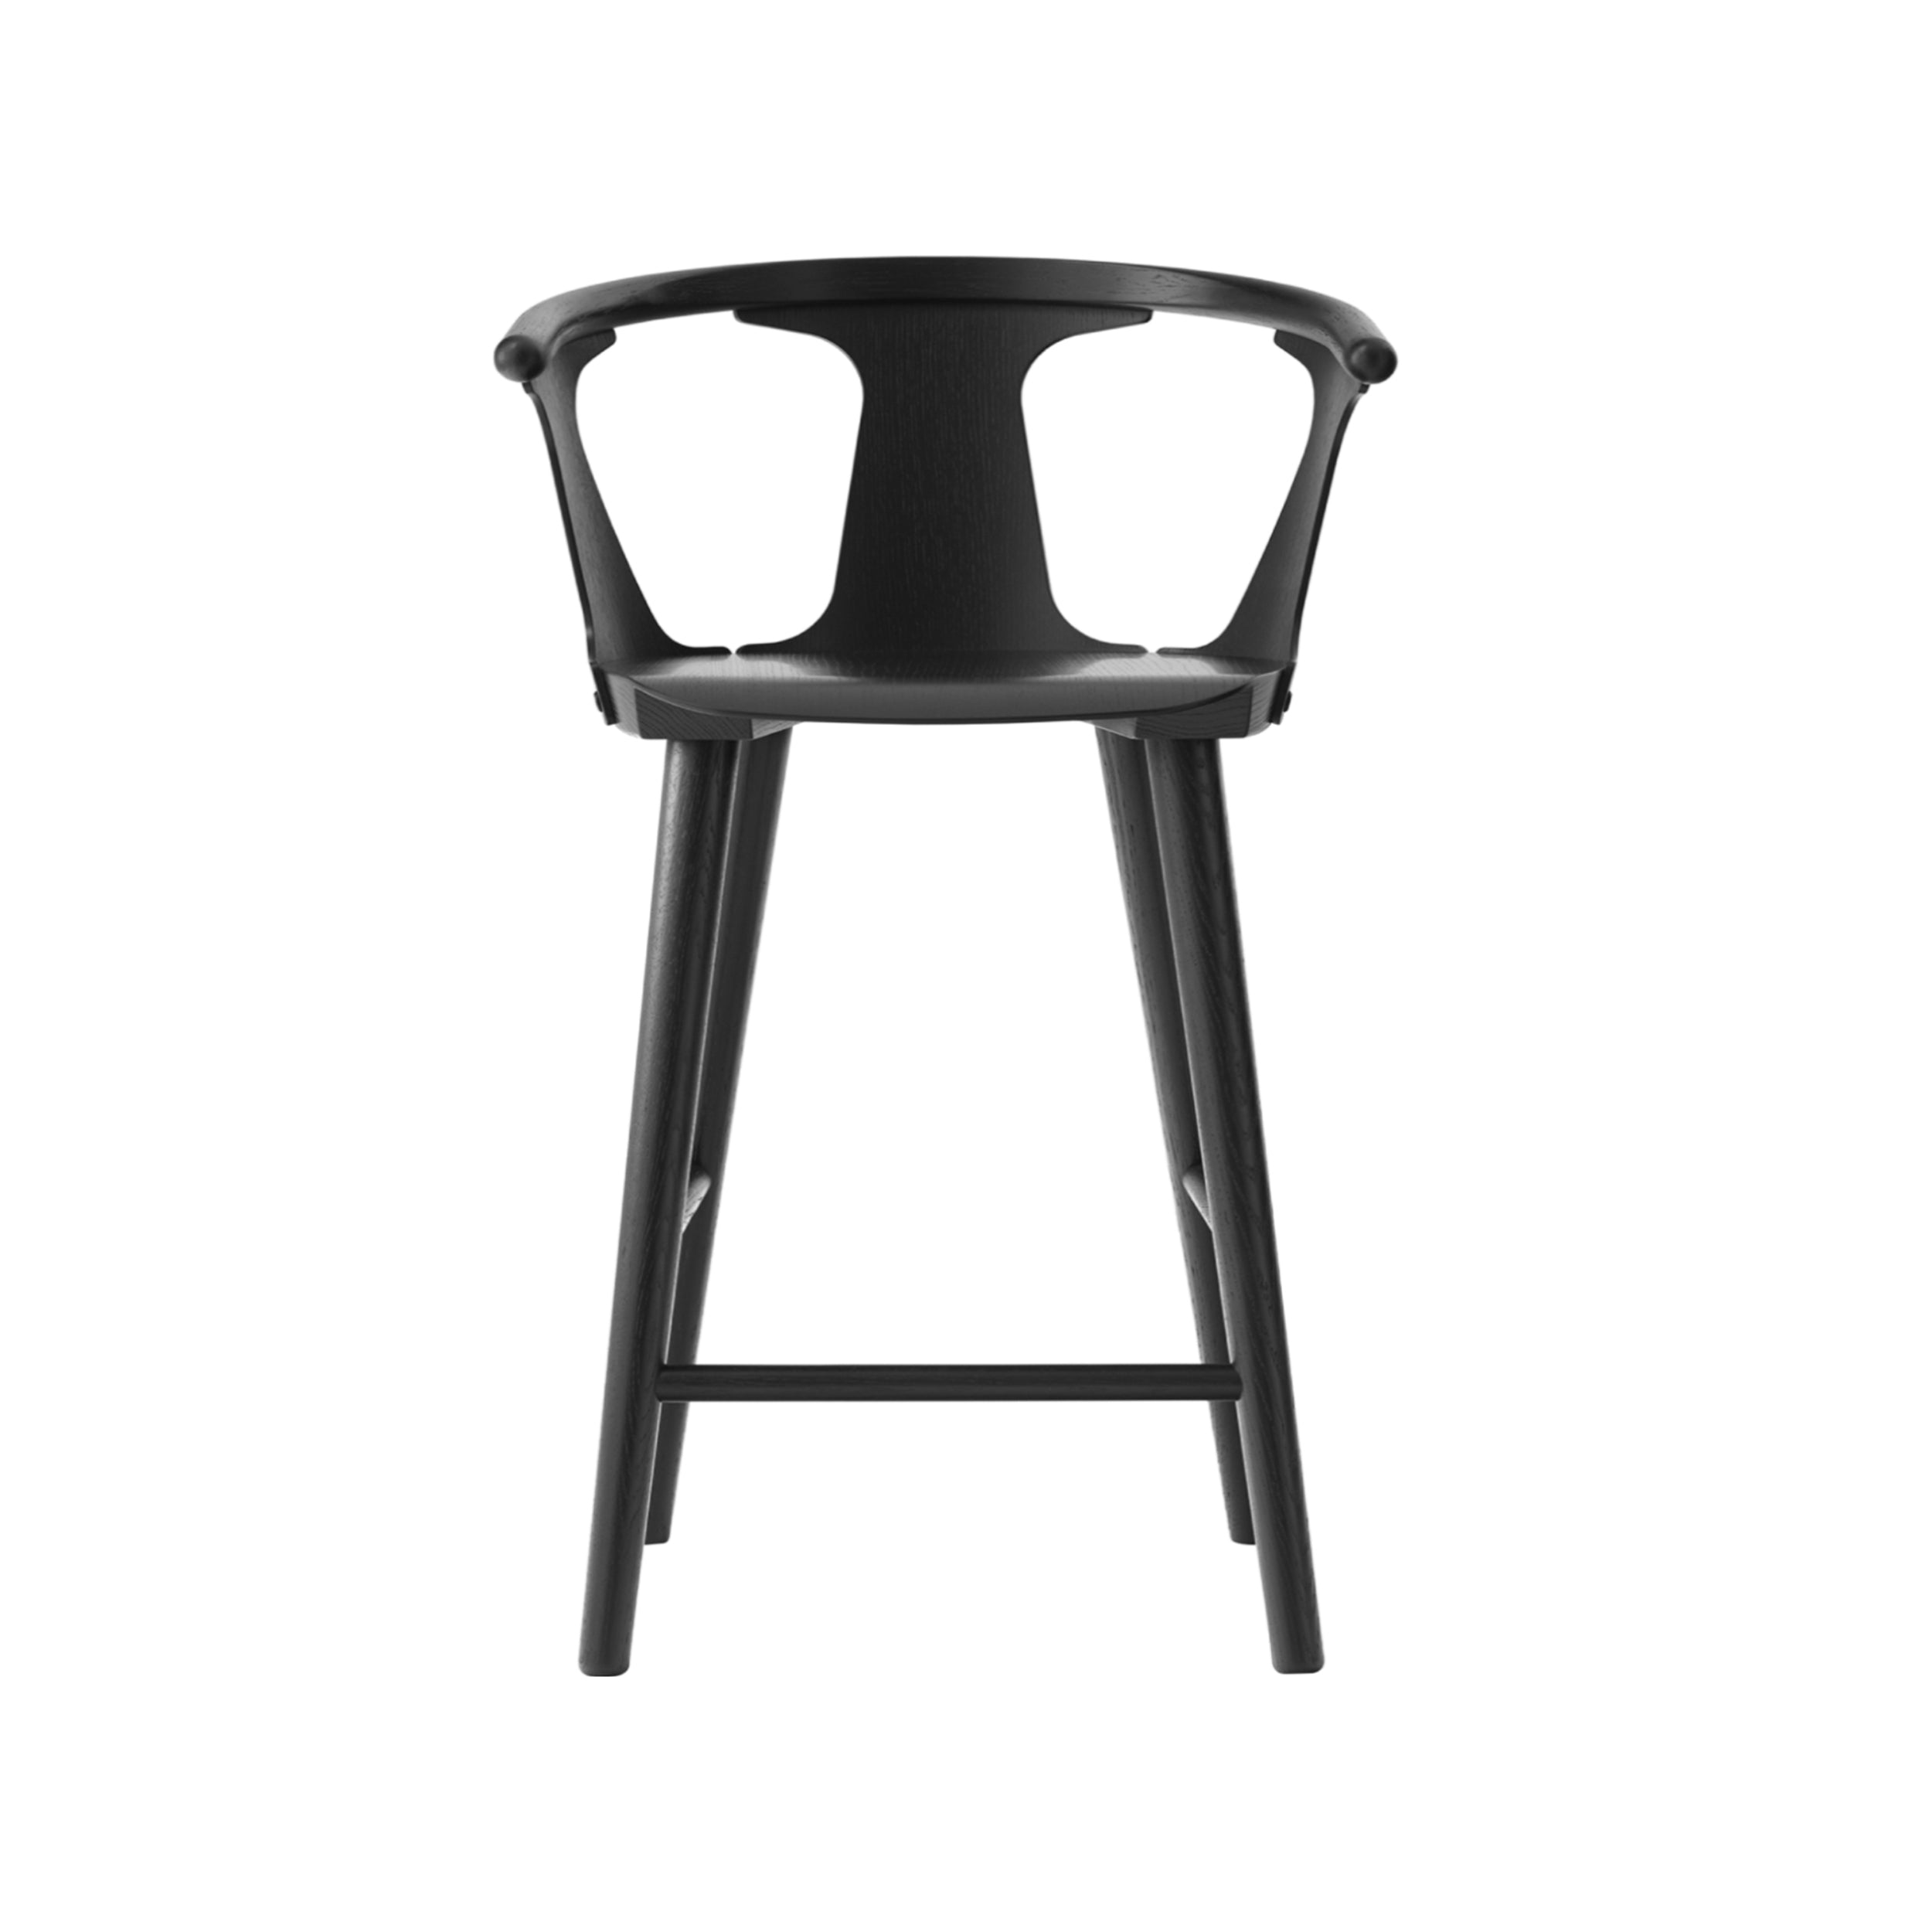 In Between Bar + Counter Stool SK7 + SK9: Counter (SK7) + Black Lacquered Oak